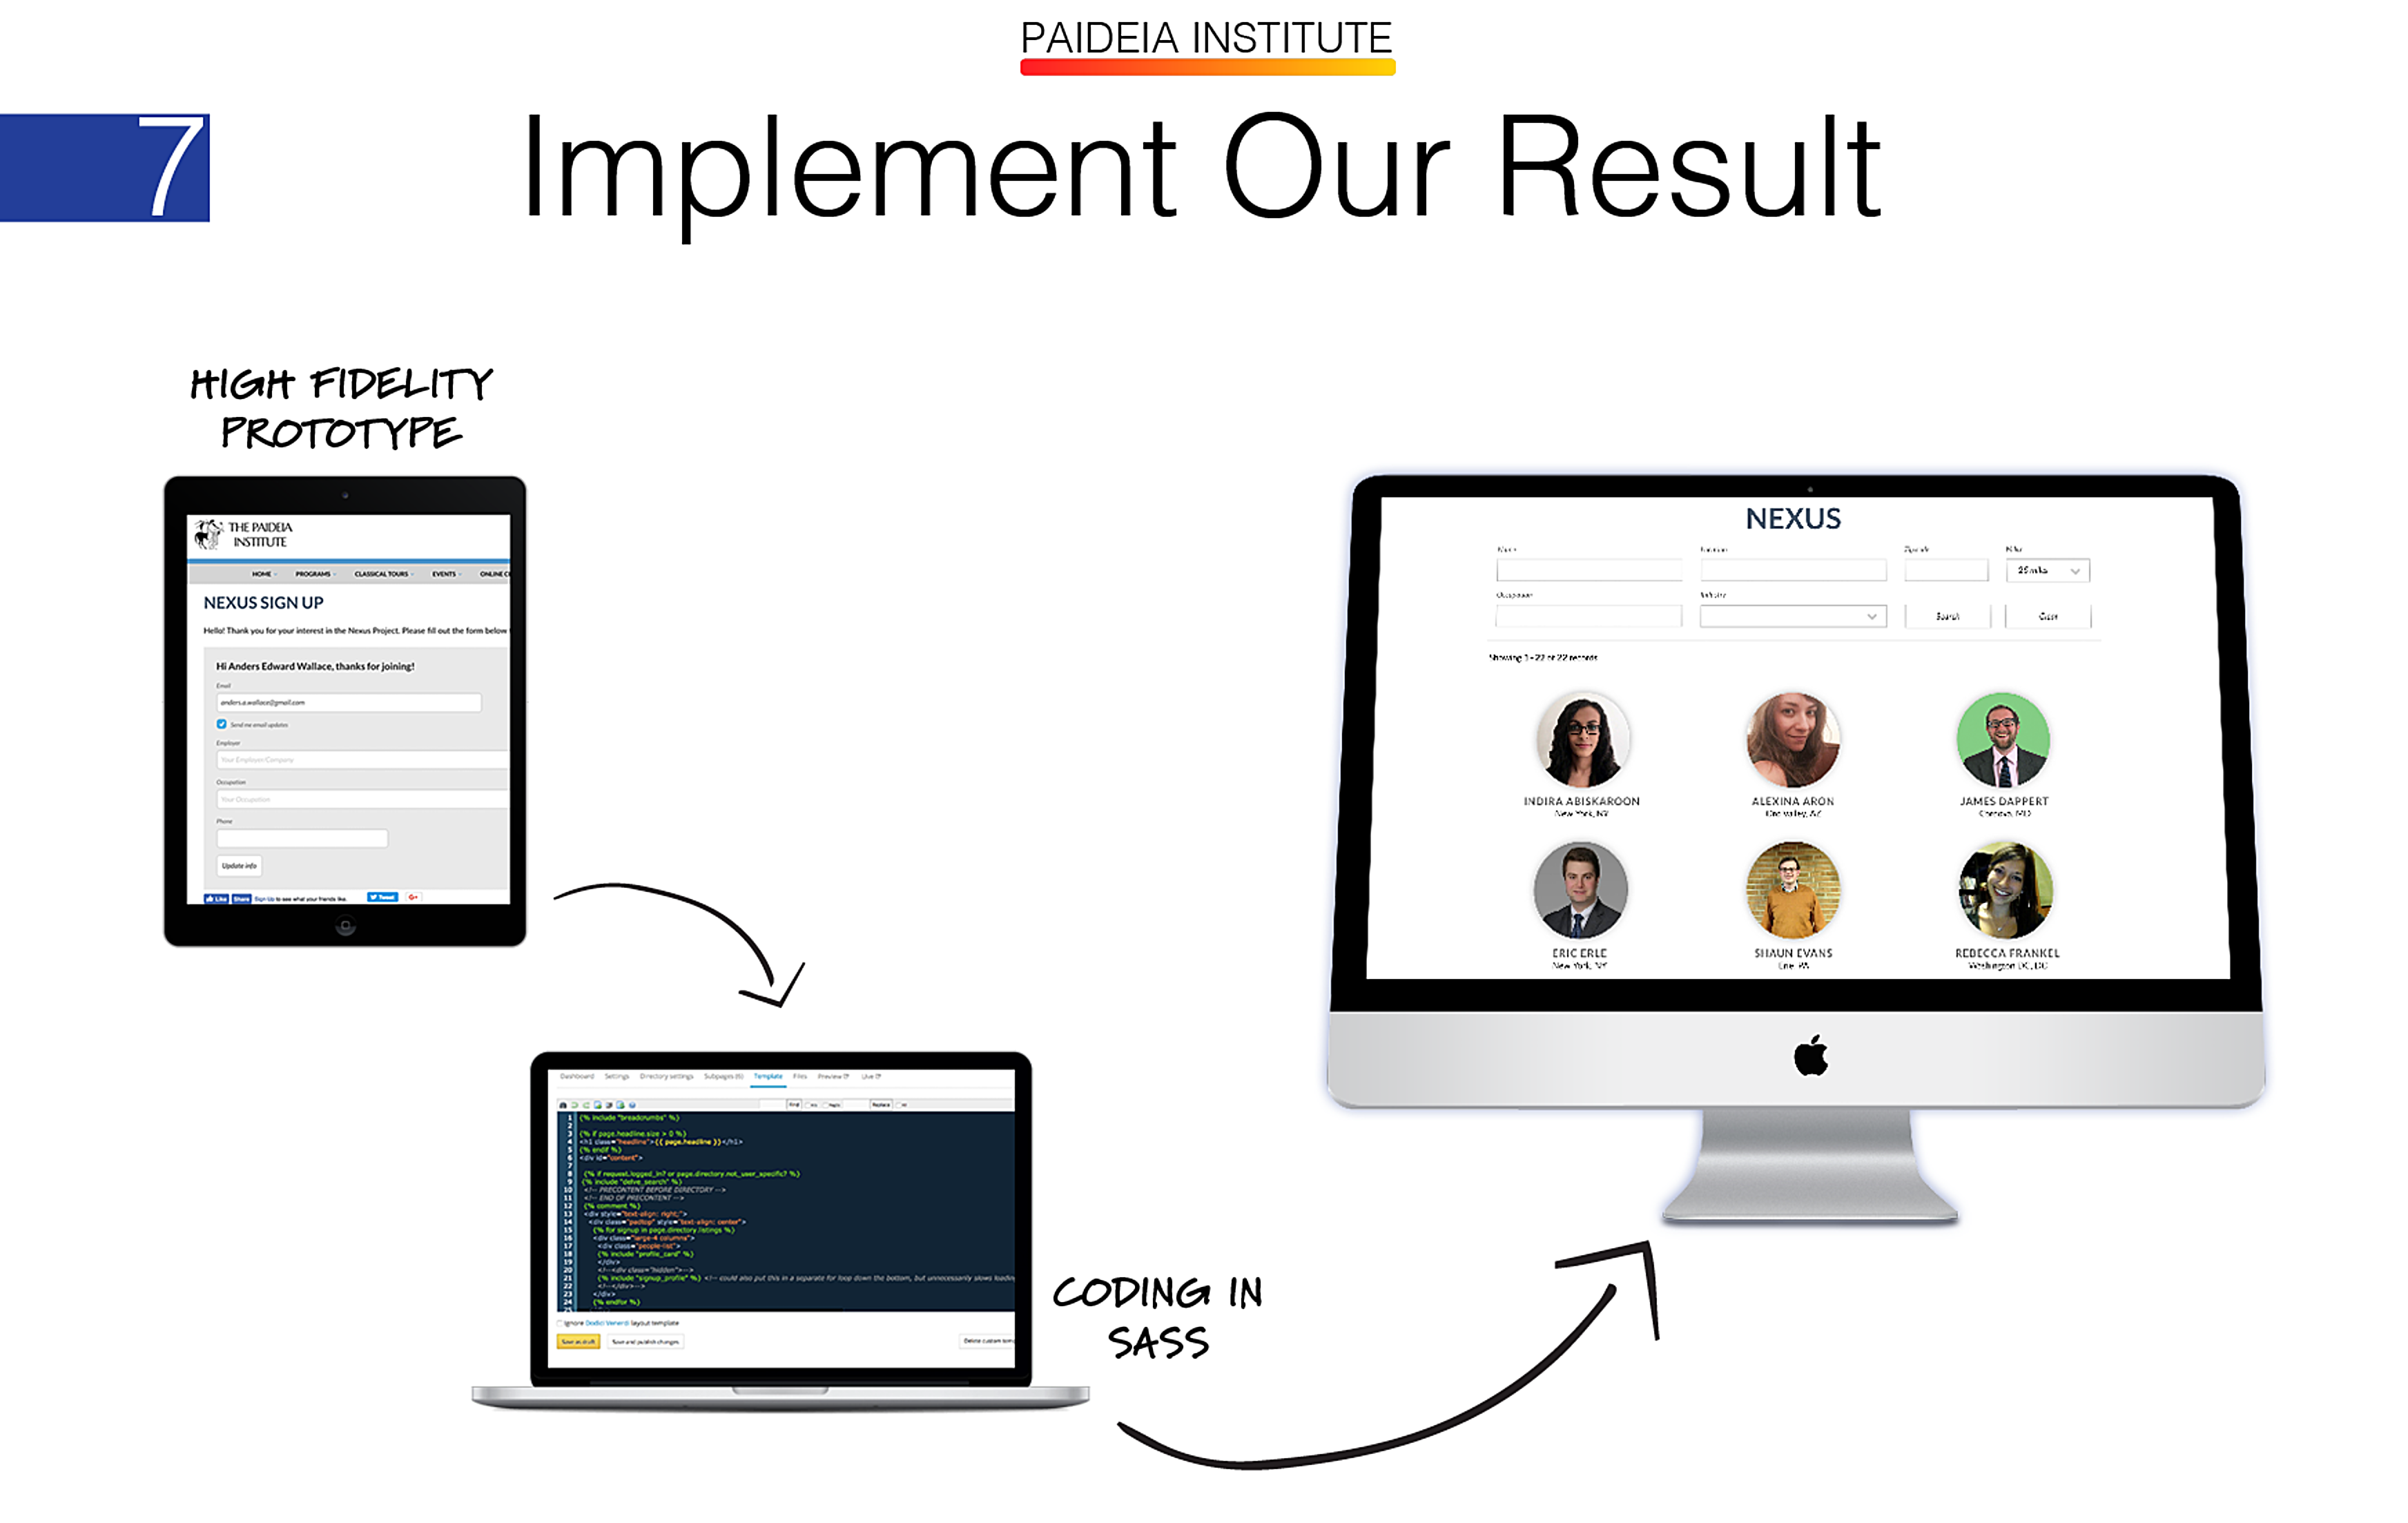 finally we implemented our result, and I coded some of the deliverables myself using HTML and SASS before we handed off our design specifications to the development team in India